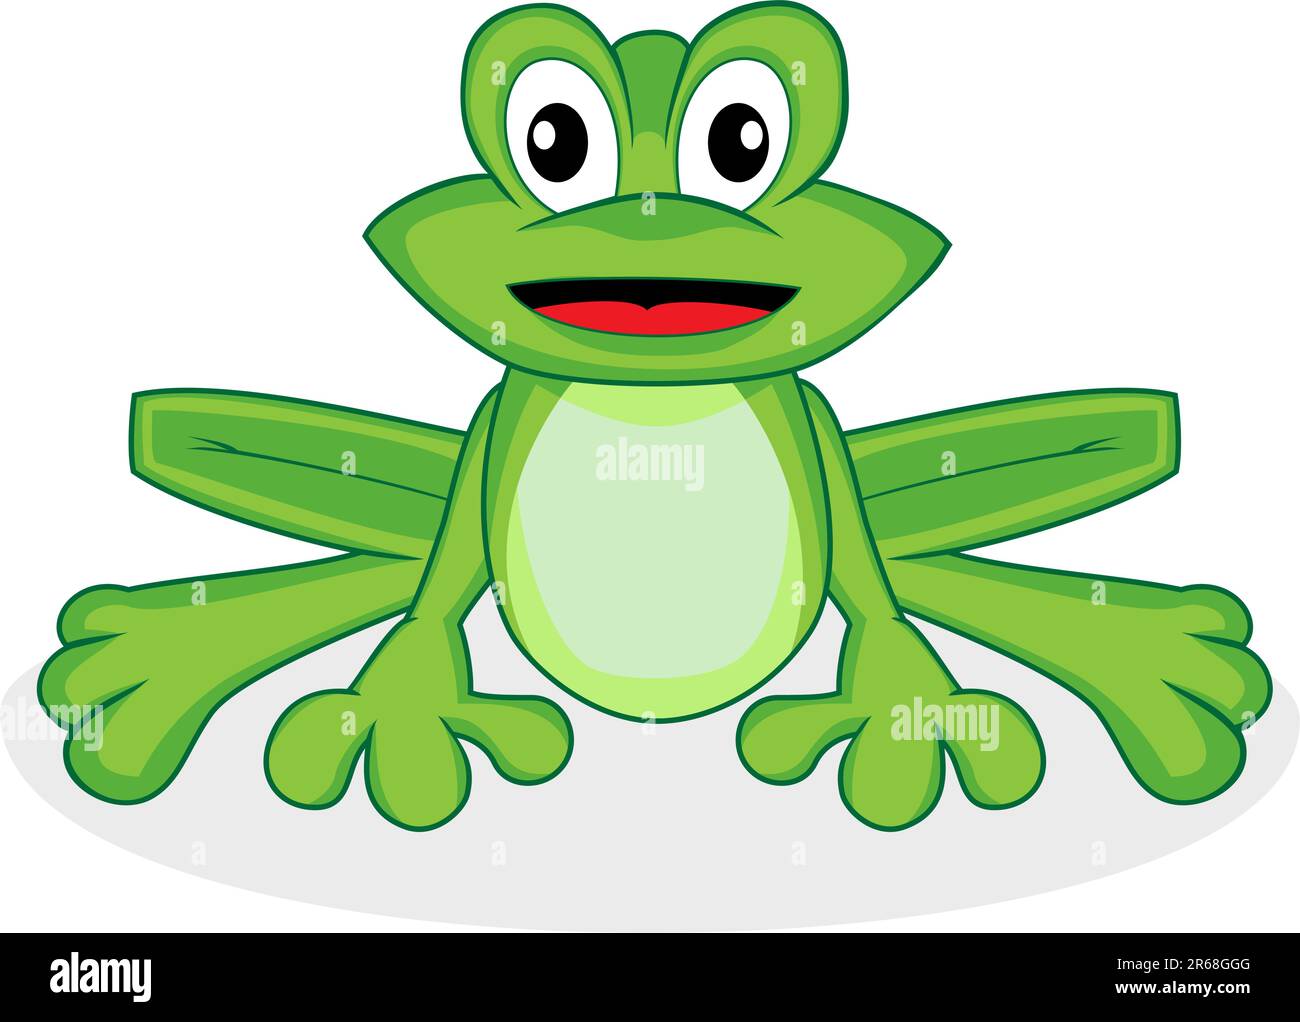 Vector illustration of a cute happy looking tiny green frog with big eyes. No gradient. Stock Vector